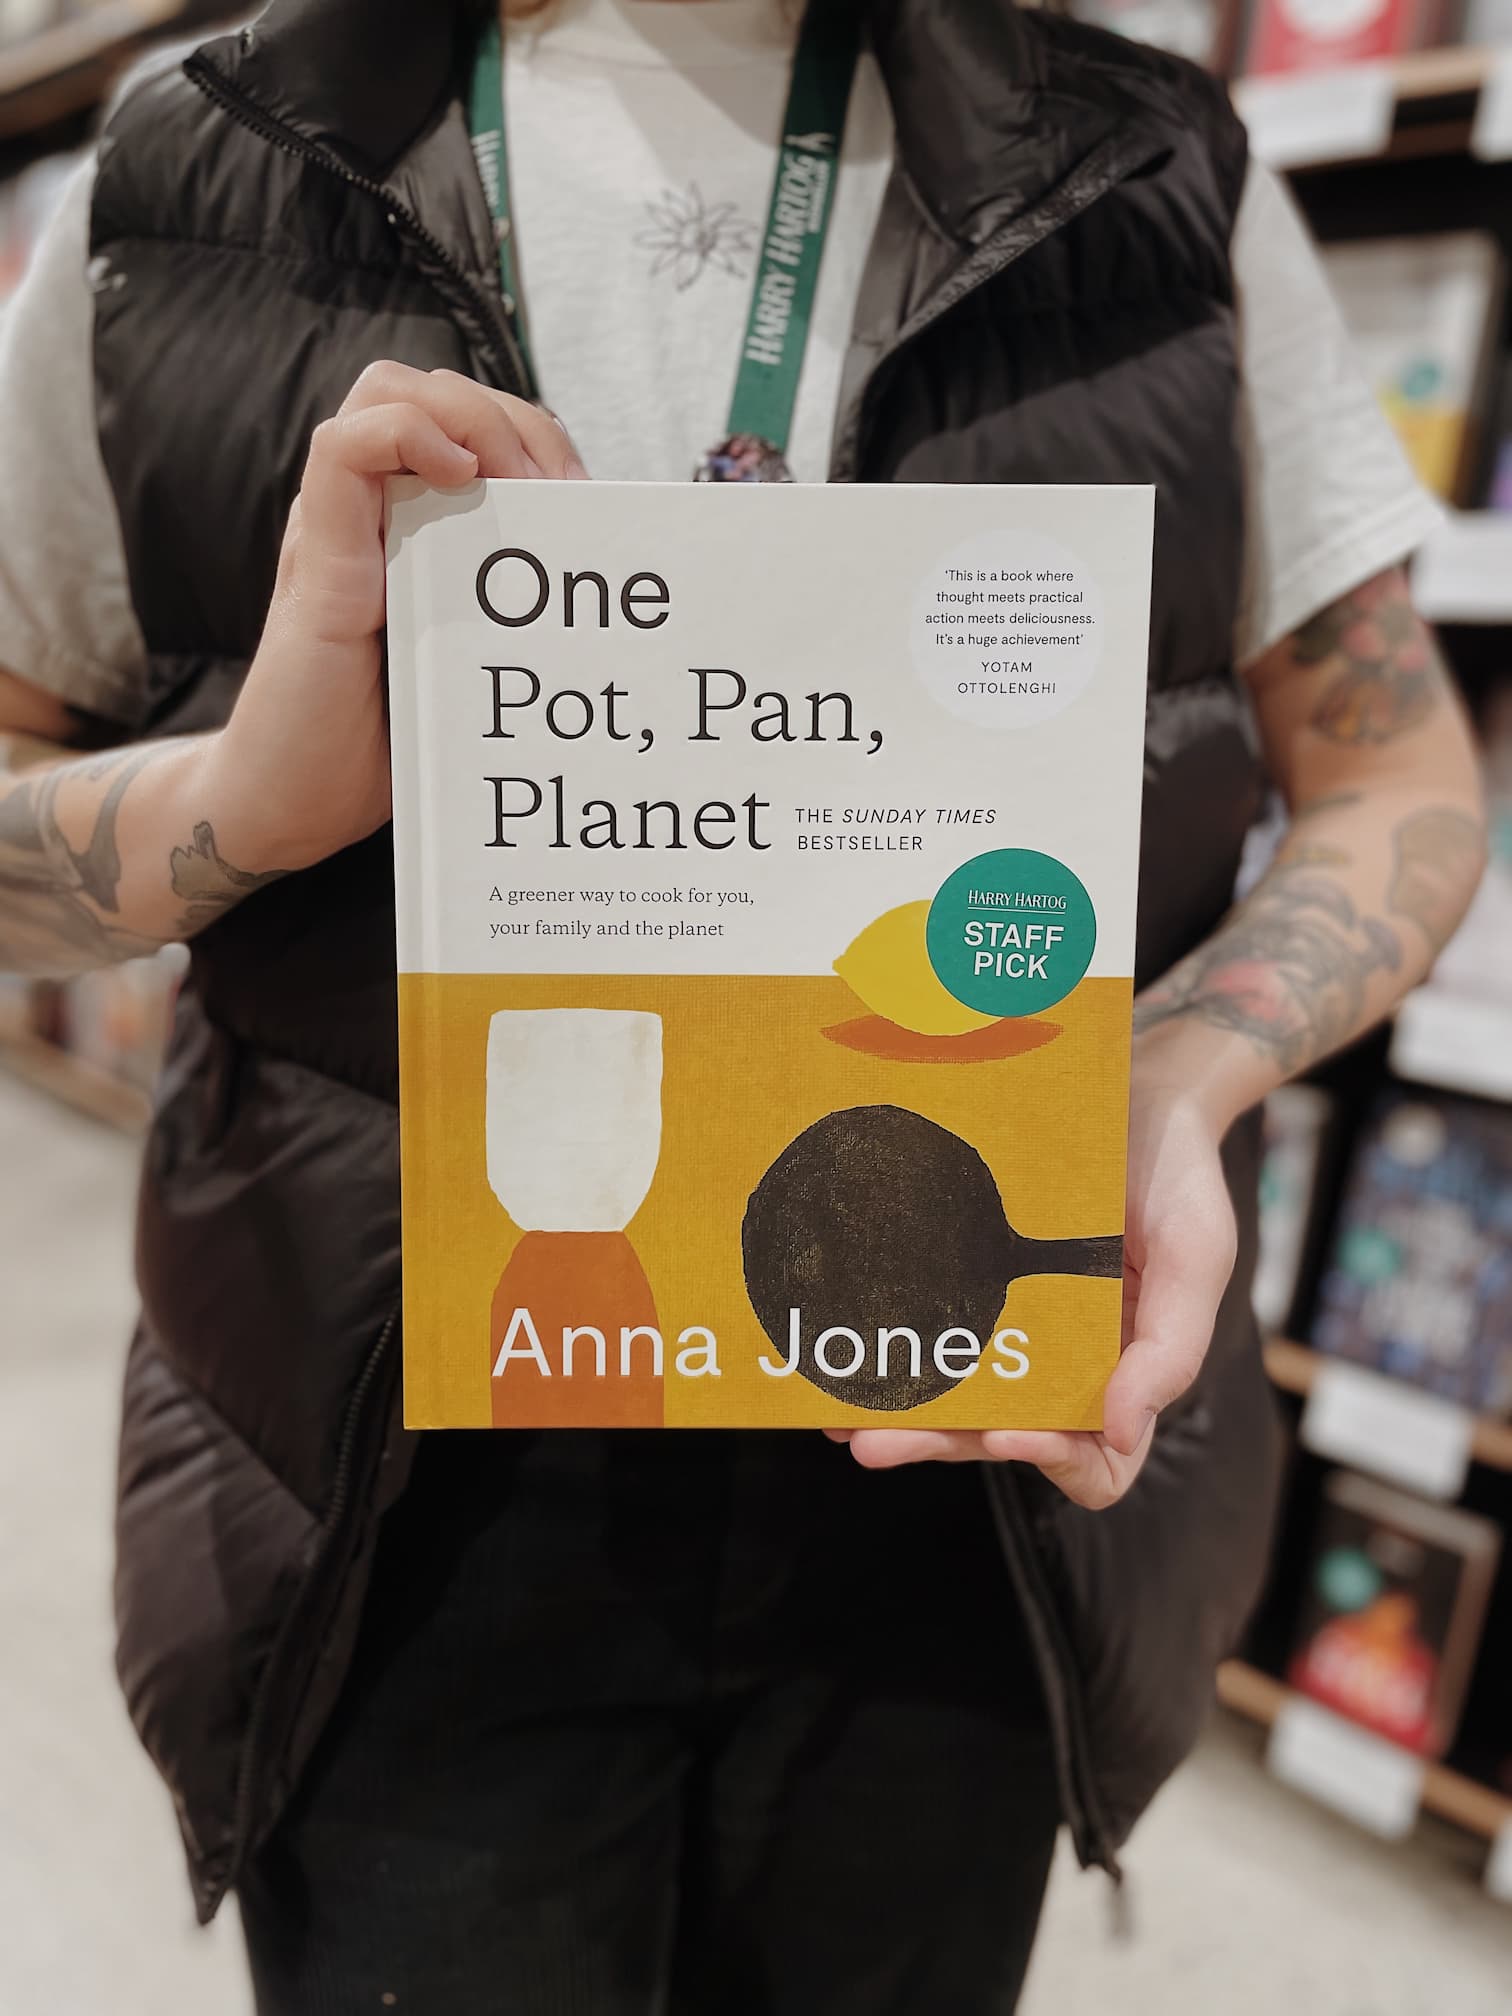 One: Pot, Pan, Planet: A greener way to cook for you, your family